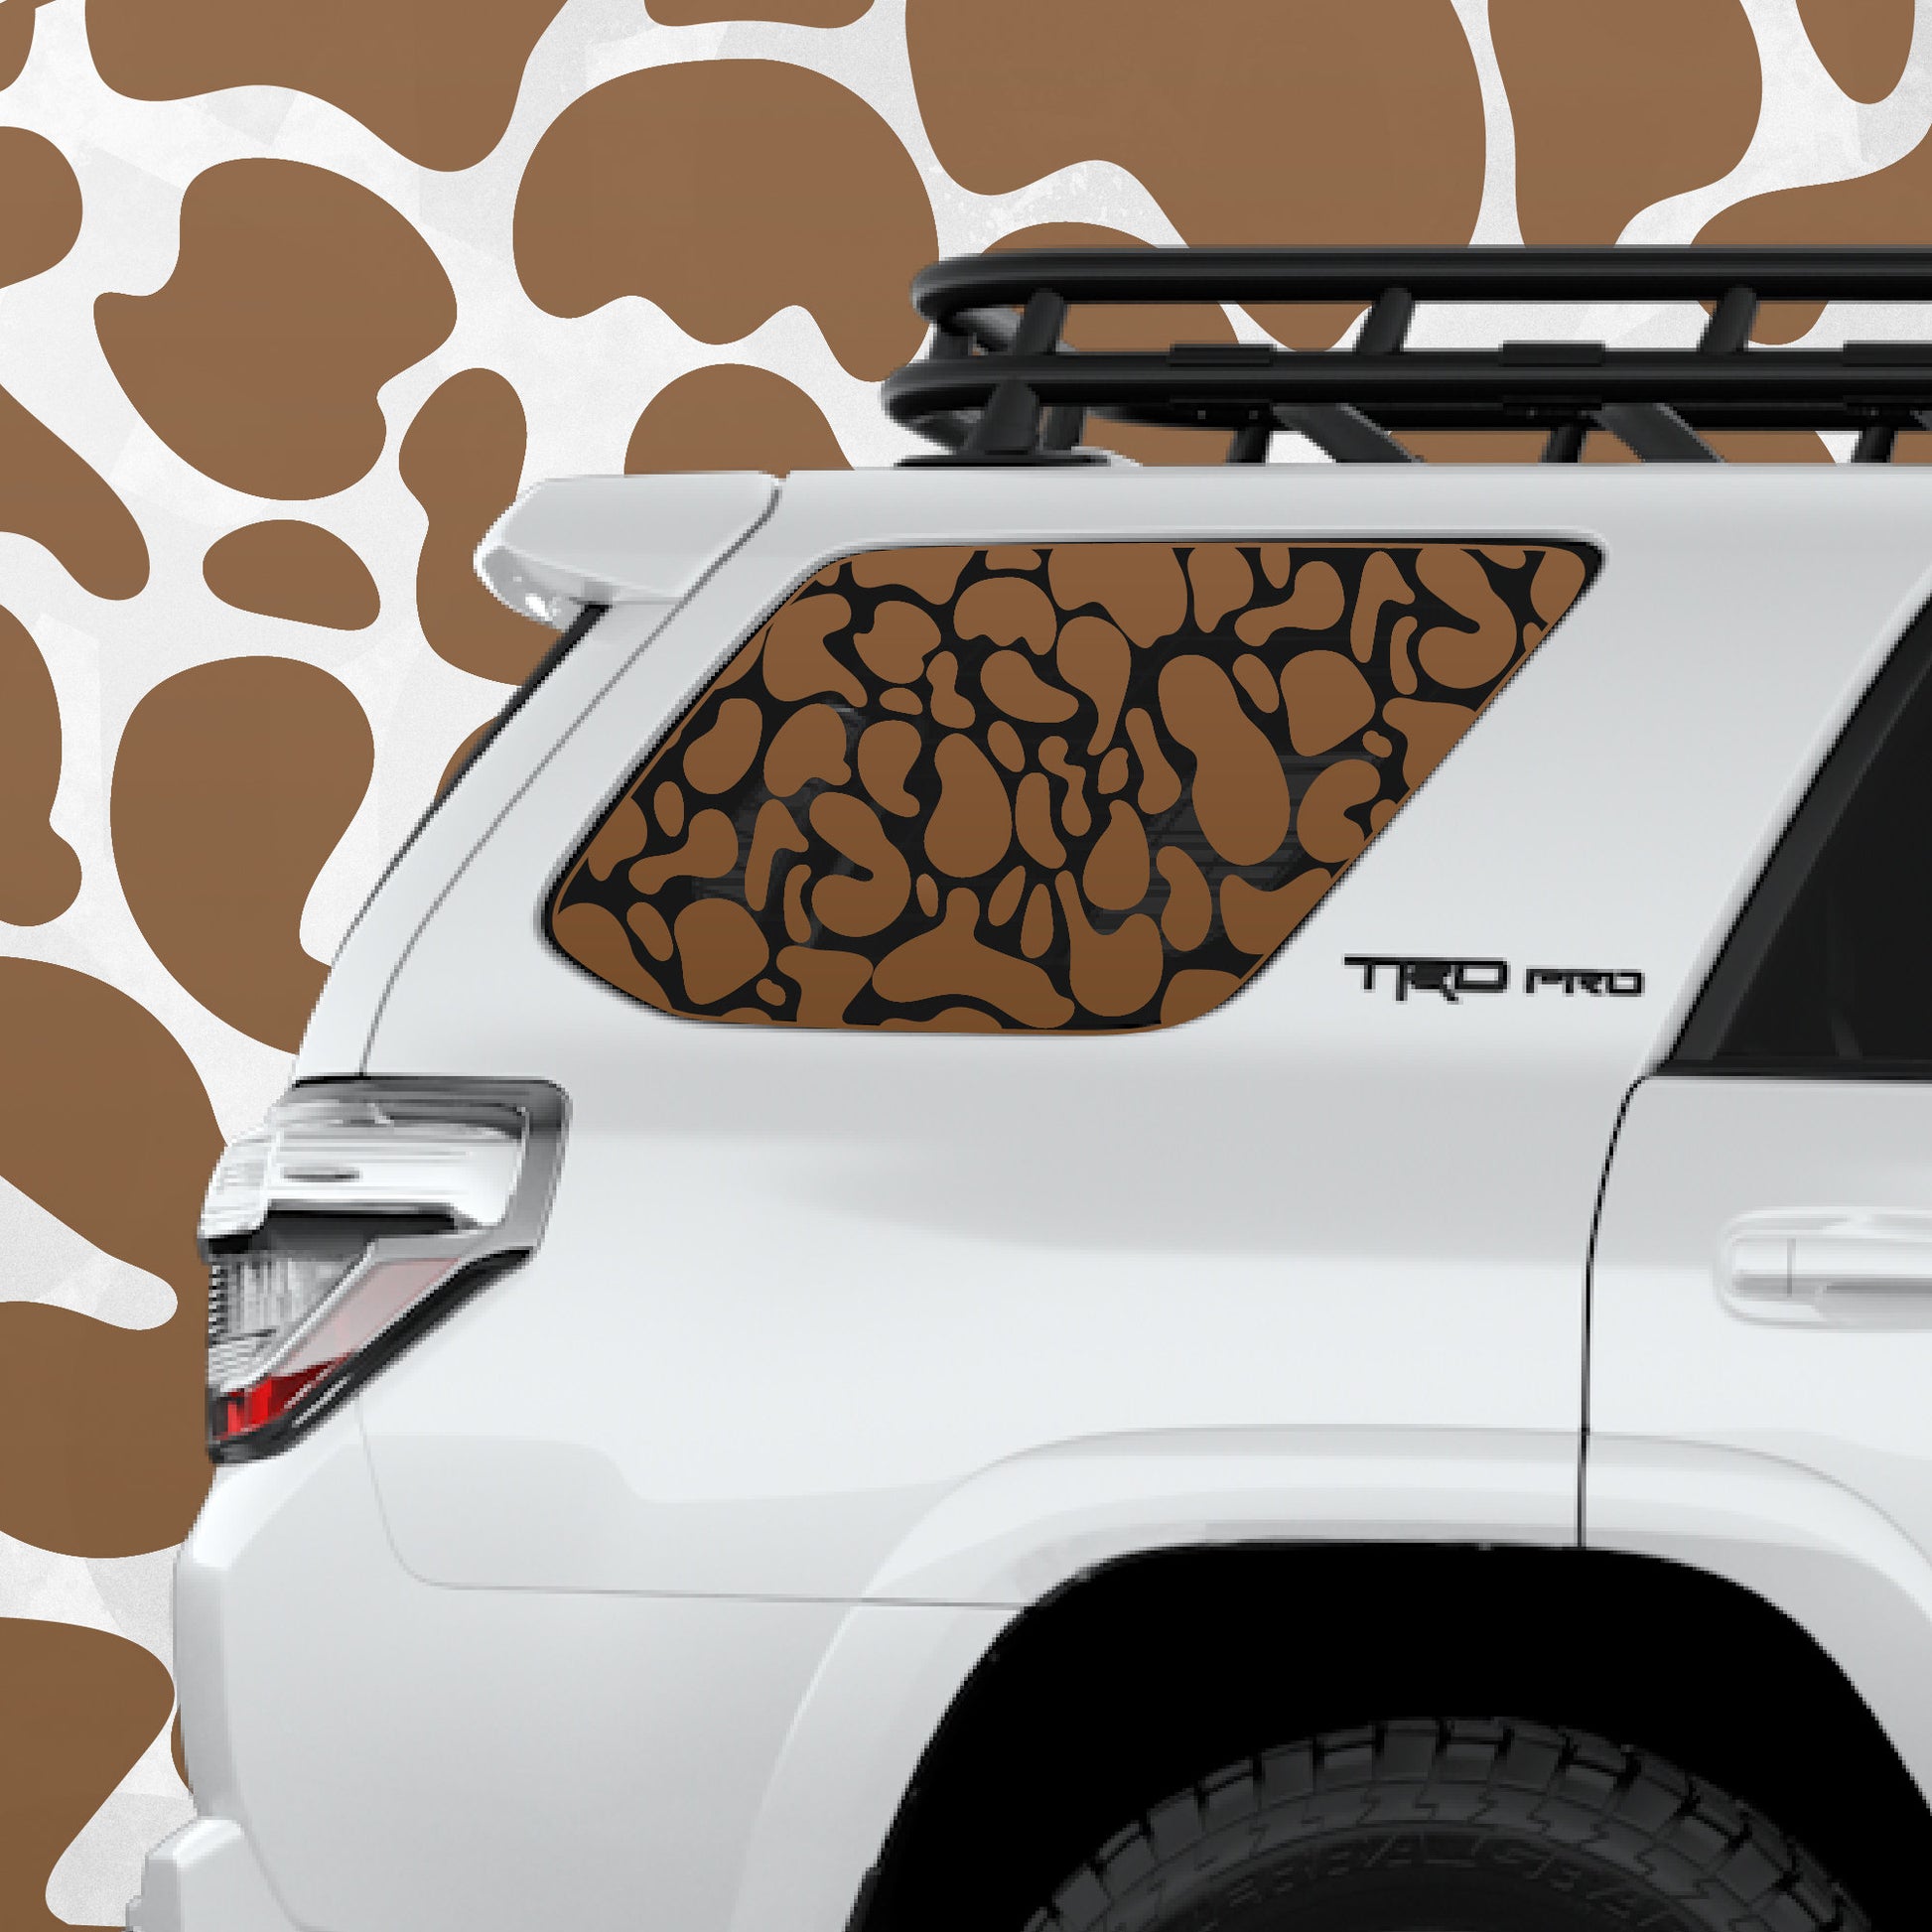 4runner Decal - Abstract cow camo print pattern quarter window decal - Fits Toyota 4runner 5th generation - Set of 2